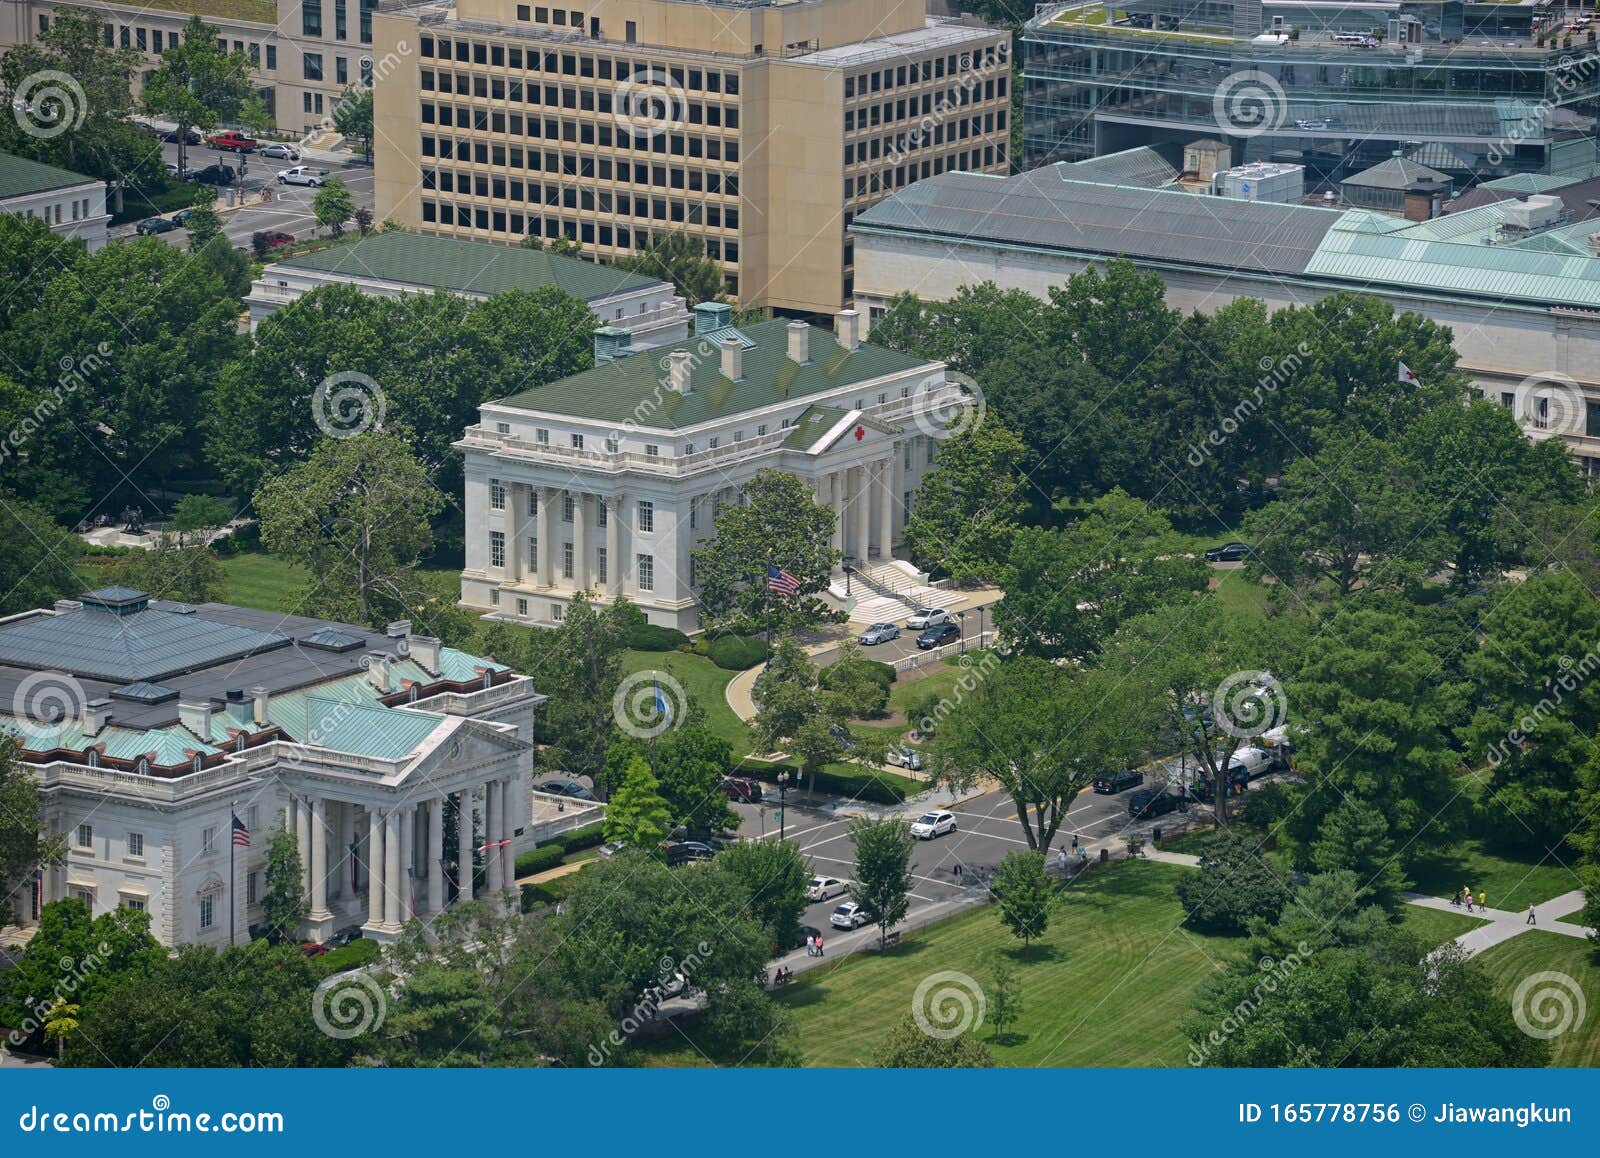 American Red Cross Building in Washington USA Stock Photo - of architecture, column: 165778756